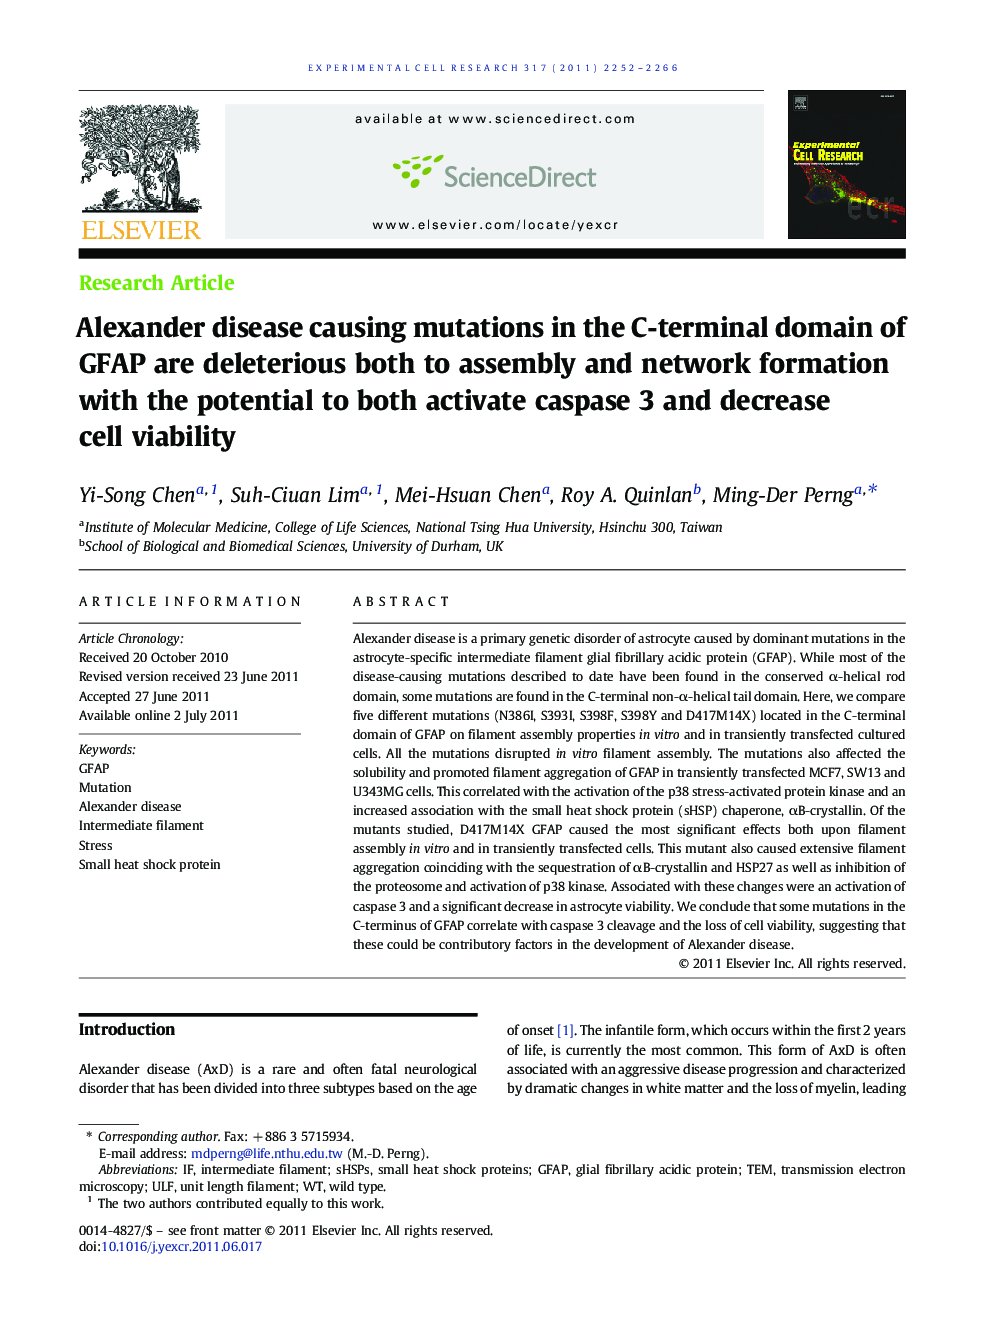 Alexander disease causing mutations in the C-terminal domain of GFAP are deleterious both to assembly and network formation with the potential to both activate caspase 3 and decrease cell viability